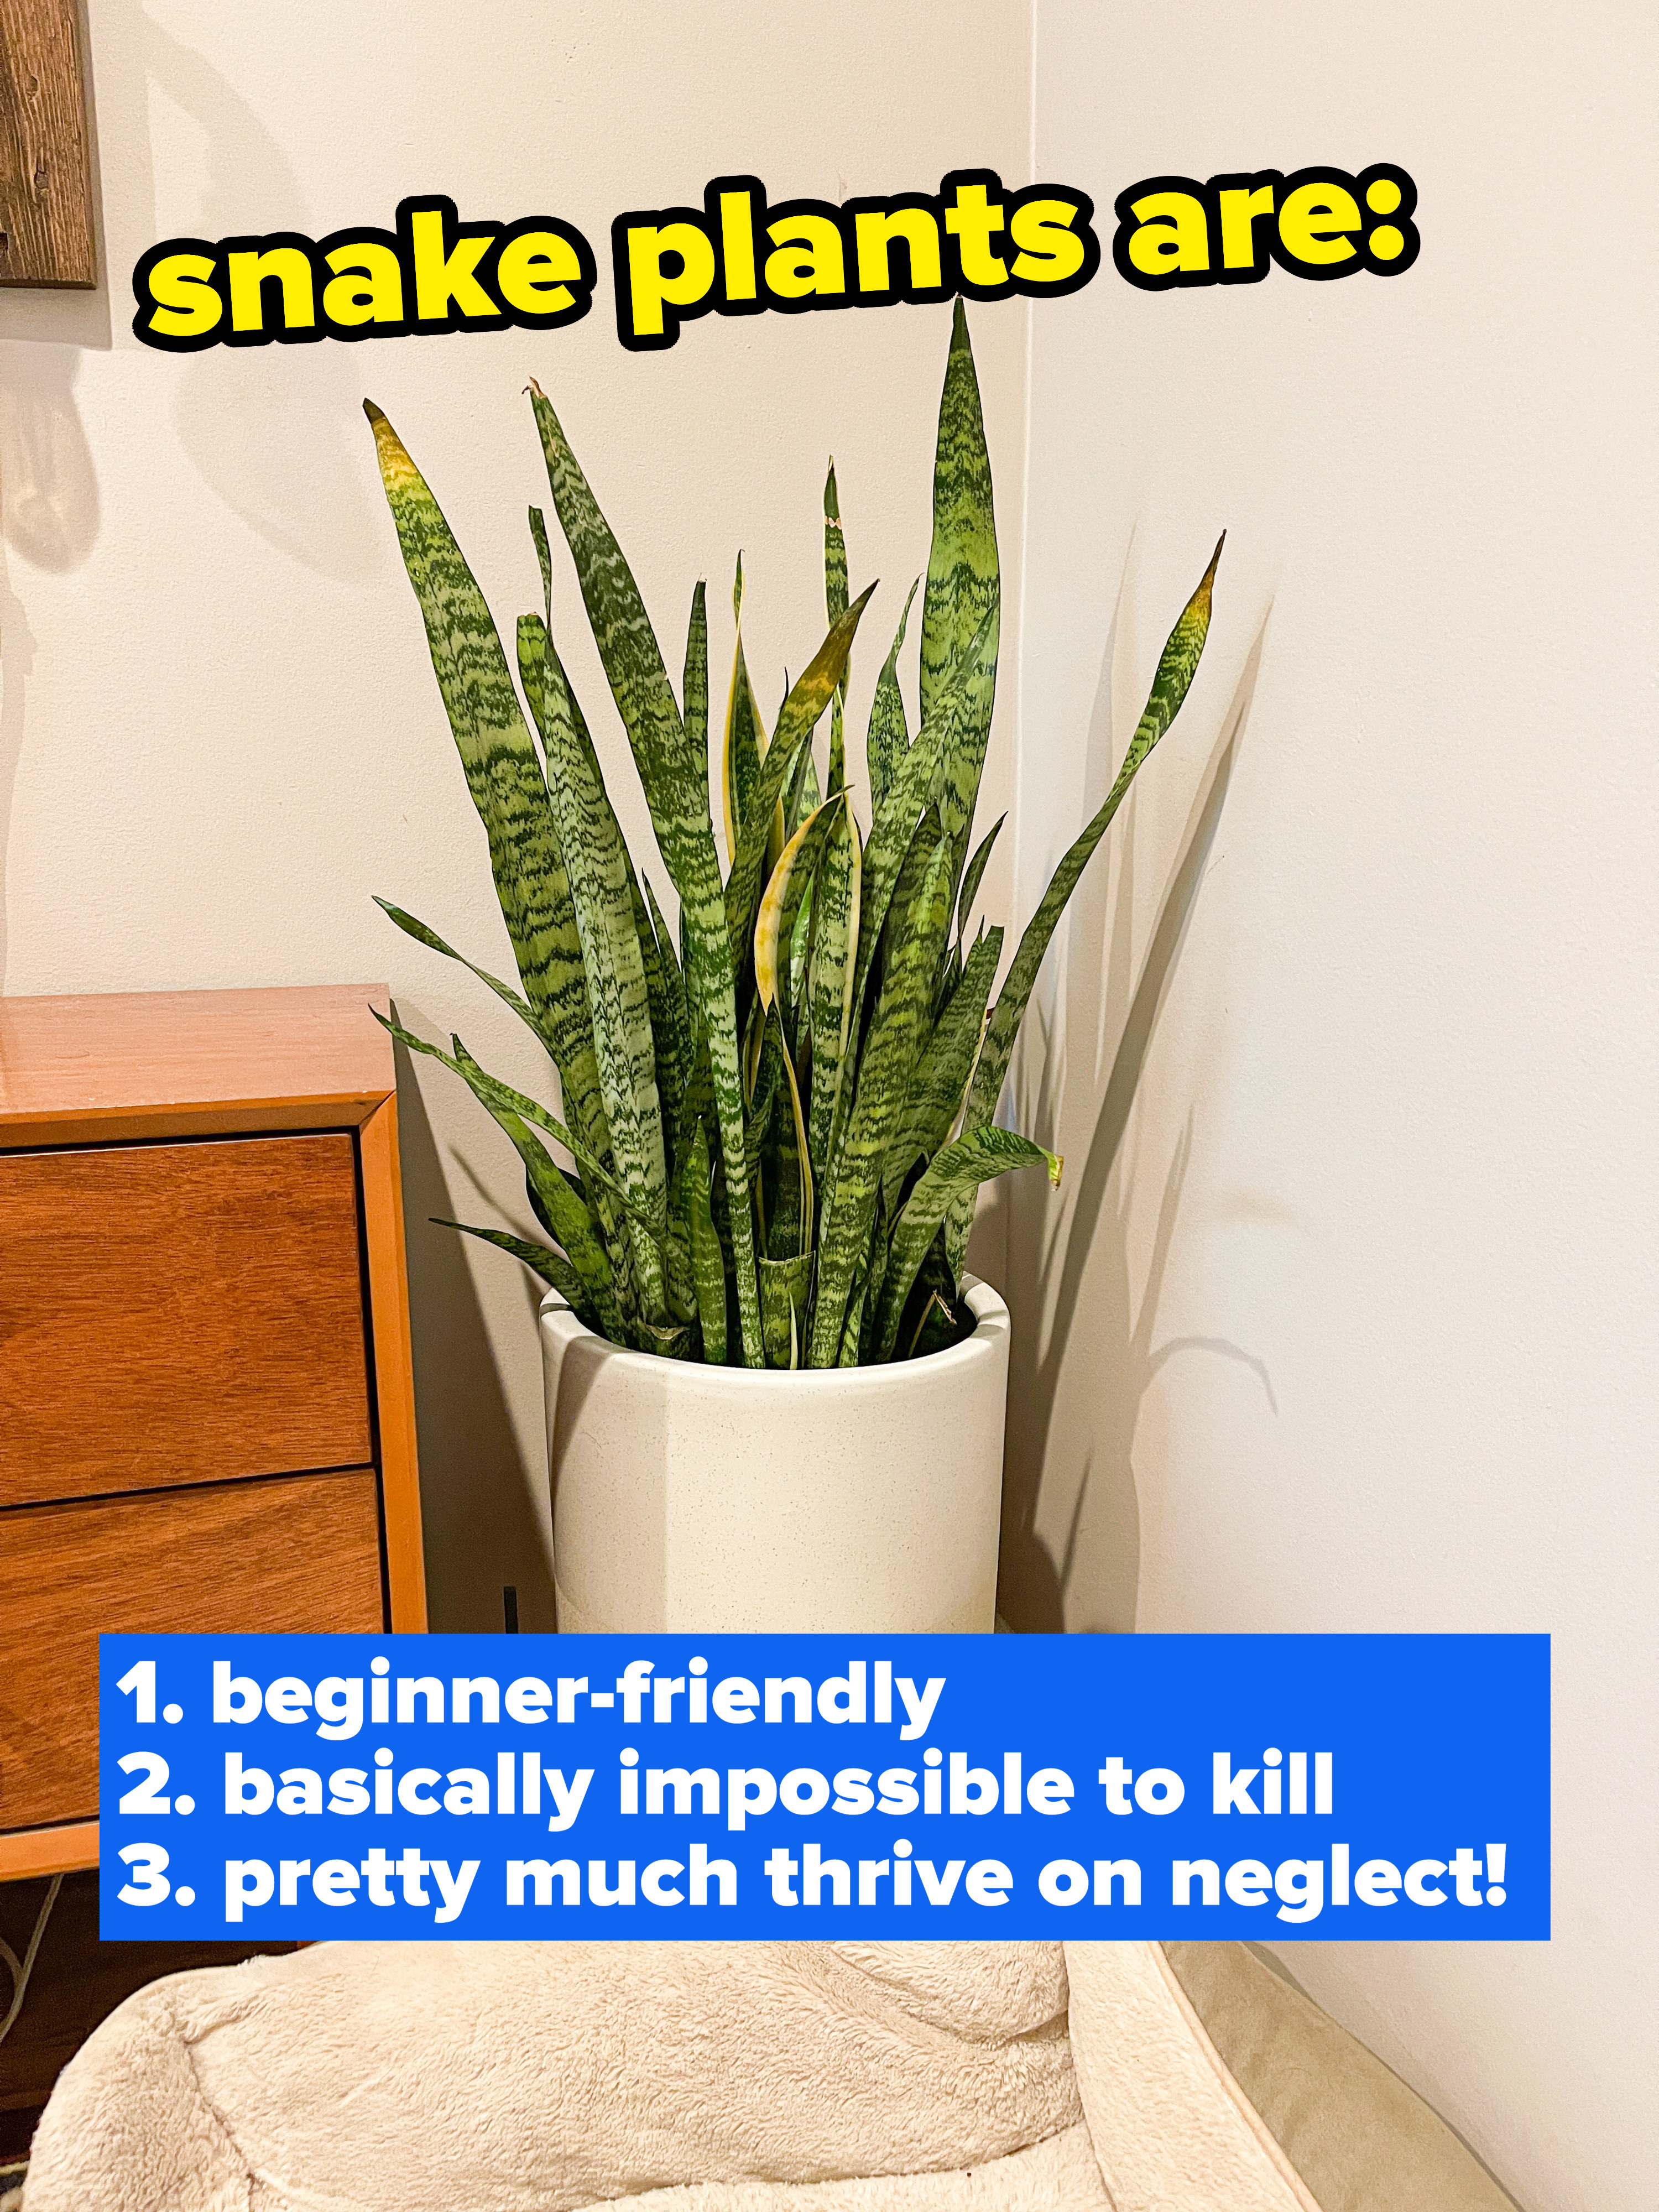 a snake plant with text that says they&#x27;re beginner friendly, impossible to kill, and thrive on neglect